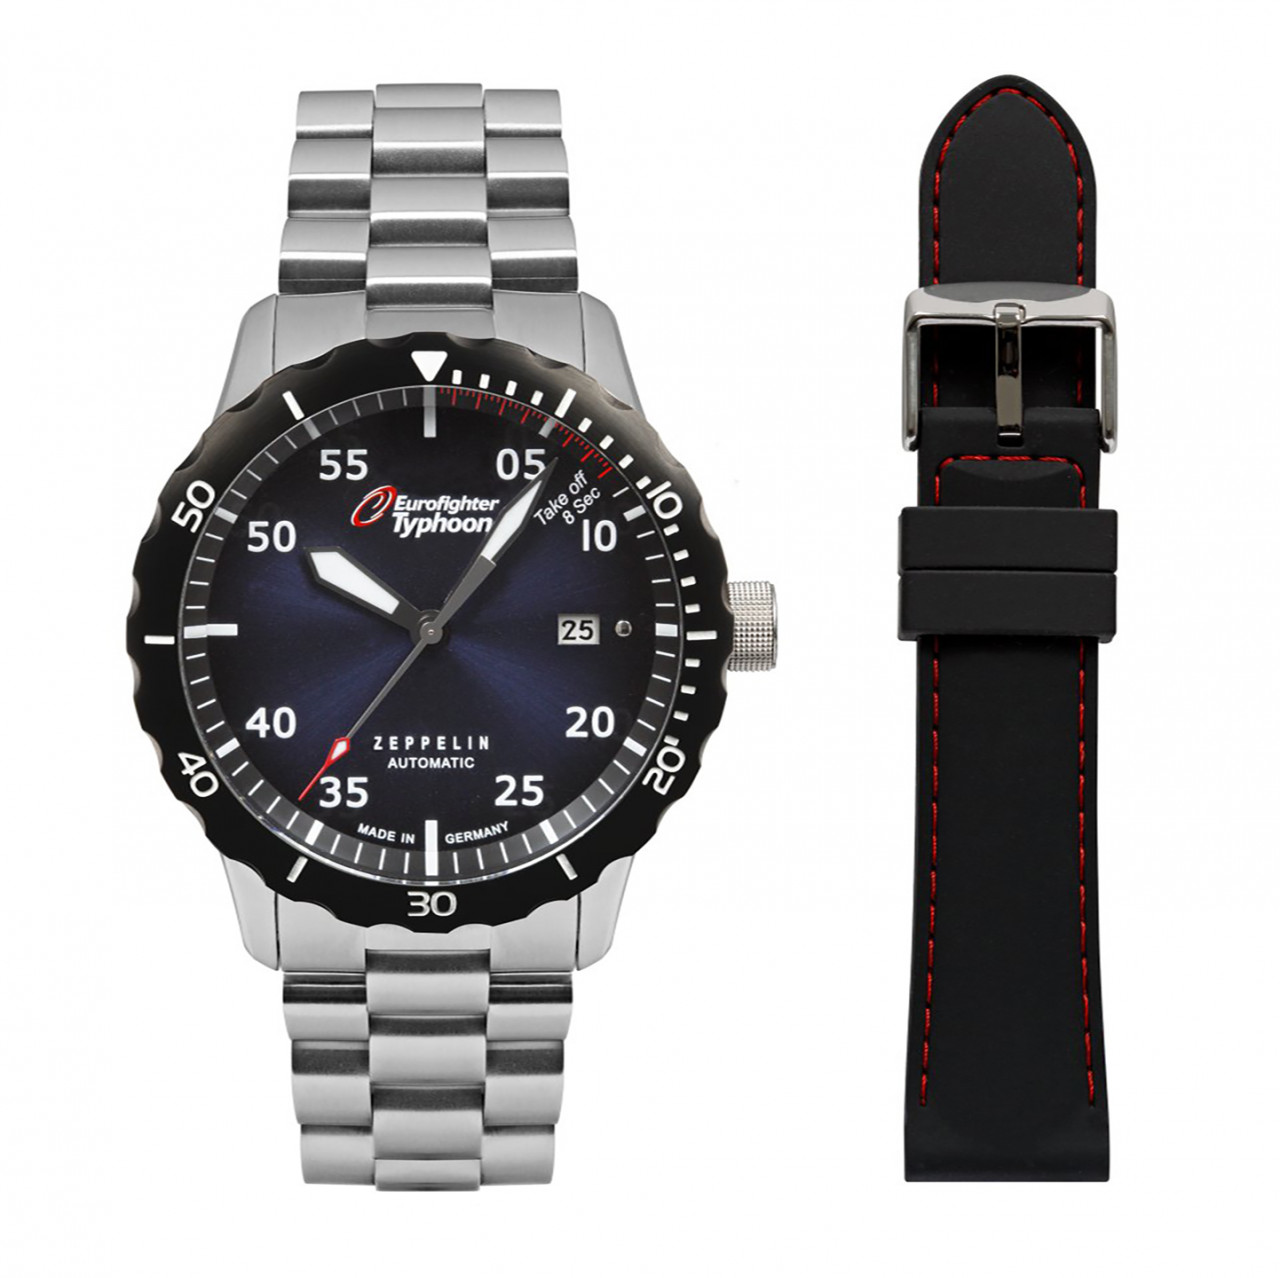 HAU, Zeppelin Automatic Ed. Eurofighter SET MB/SI Kal. 9015 24 Jewels, Steelcase Diver wr 20atm